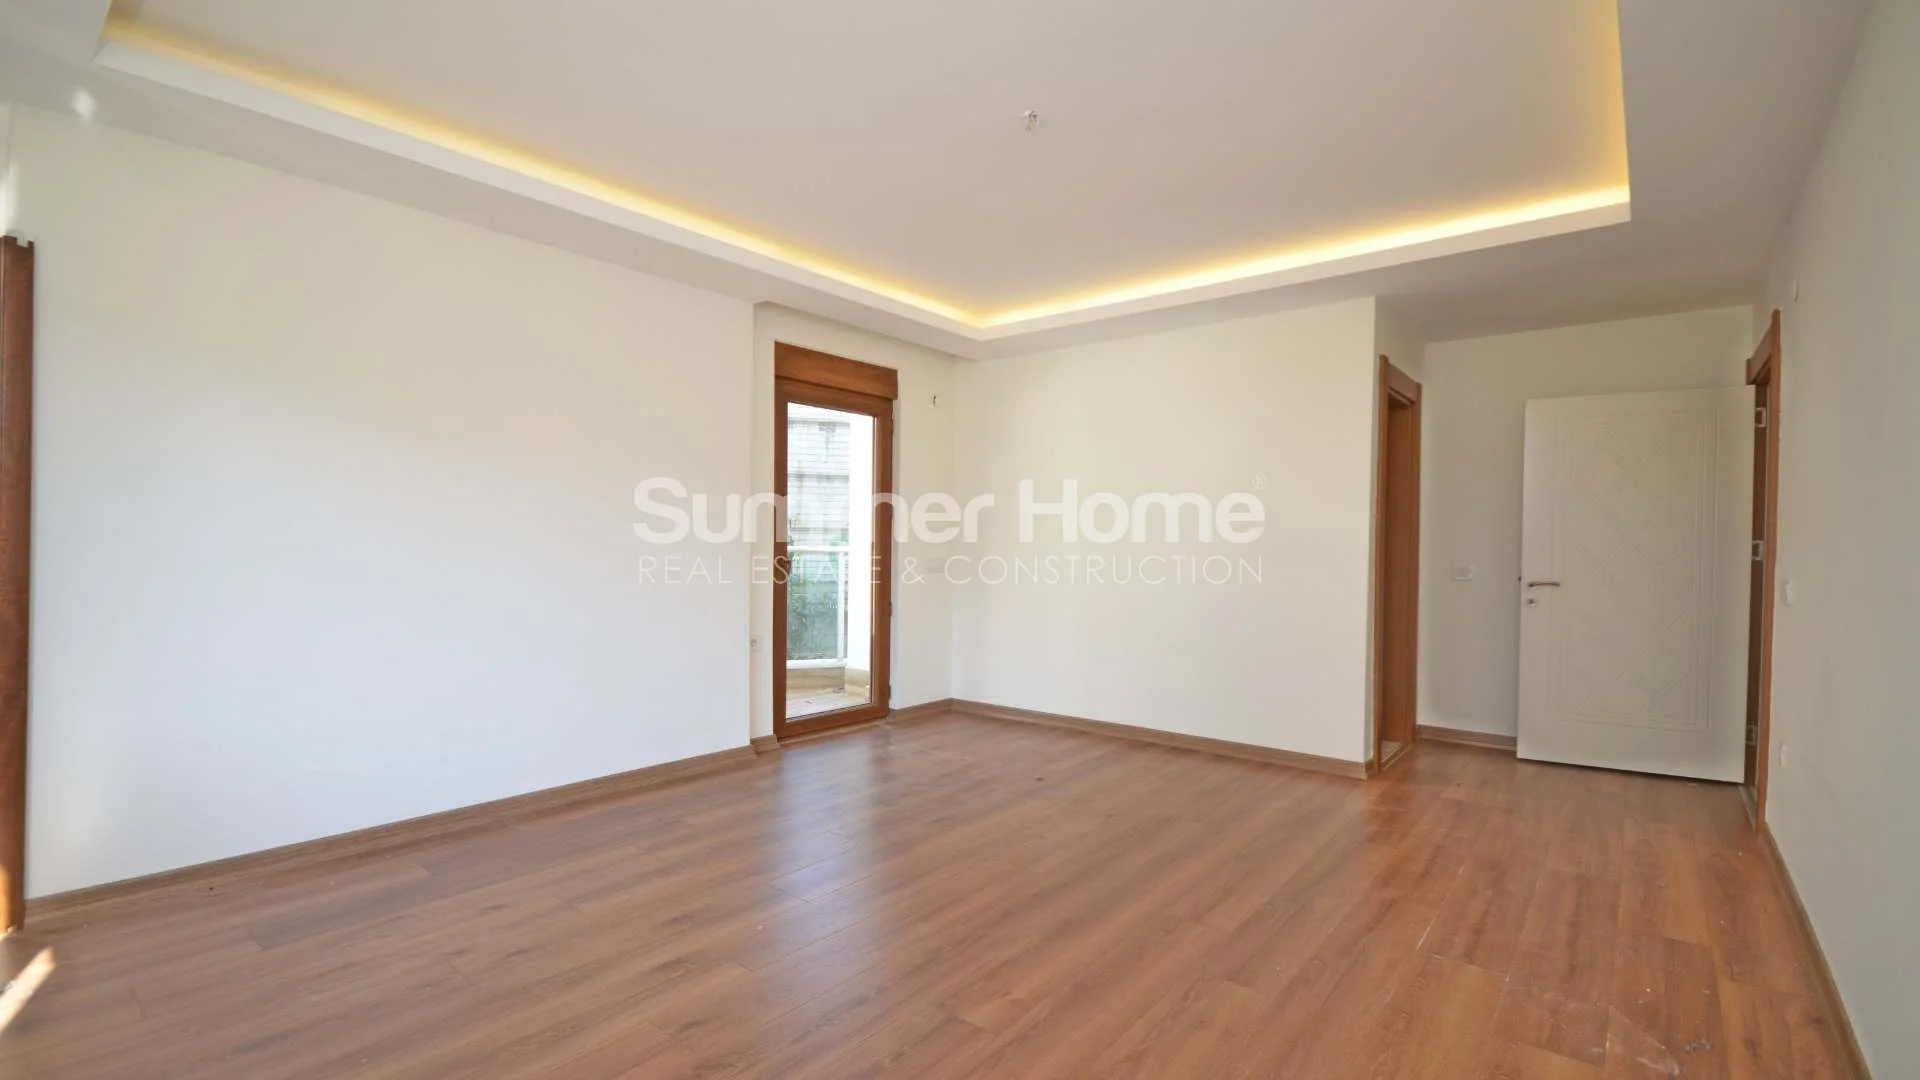 For sale Apartment Alanya Hasbahce Interior - 22